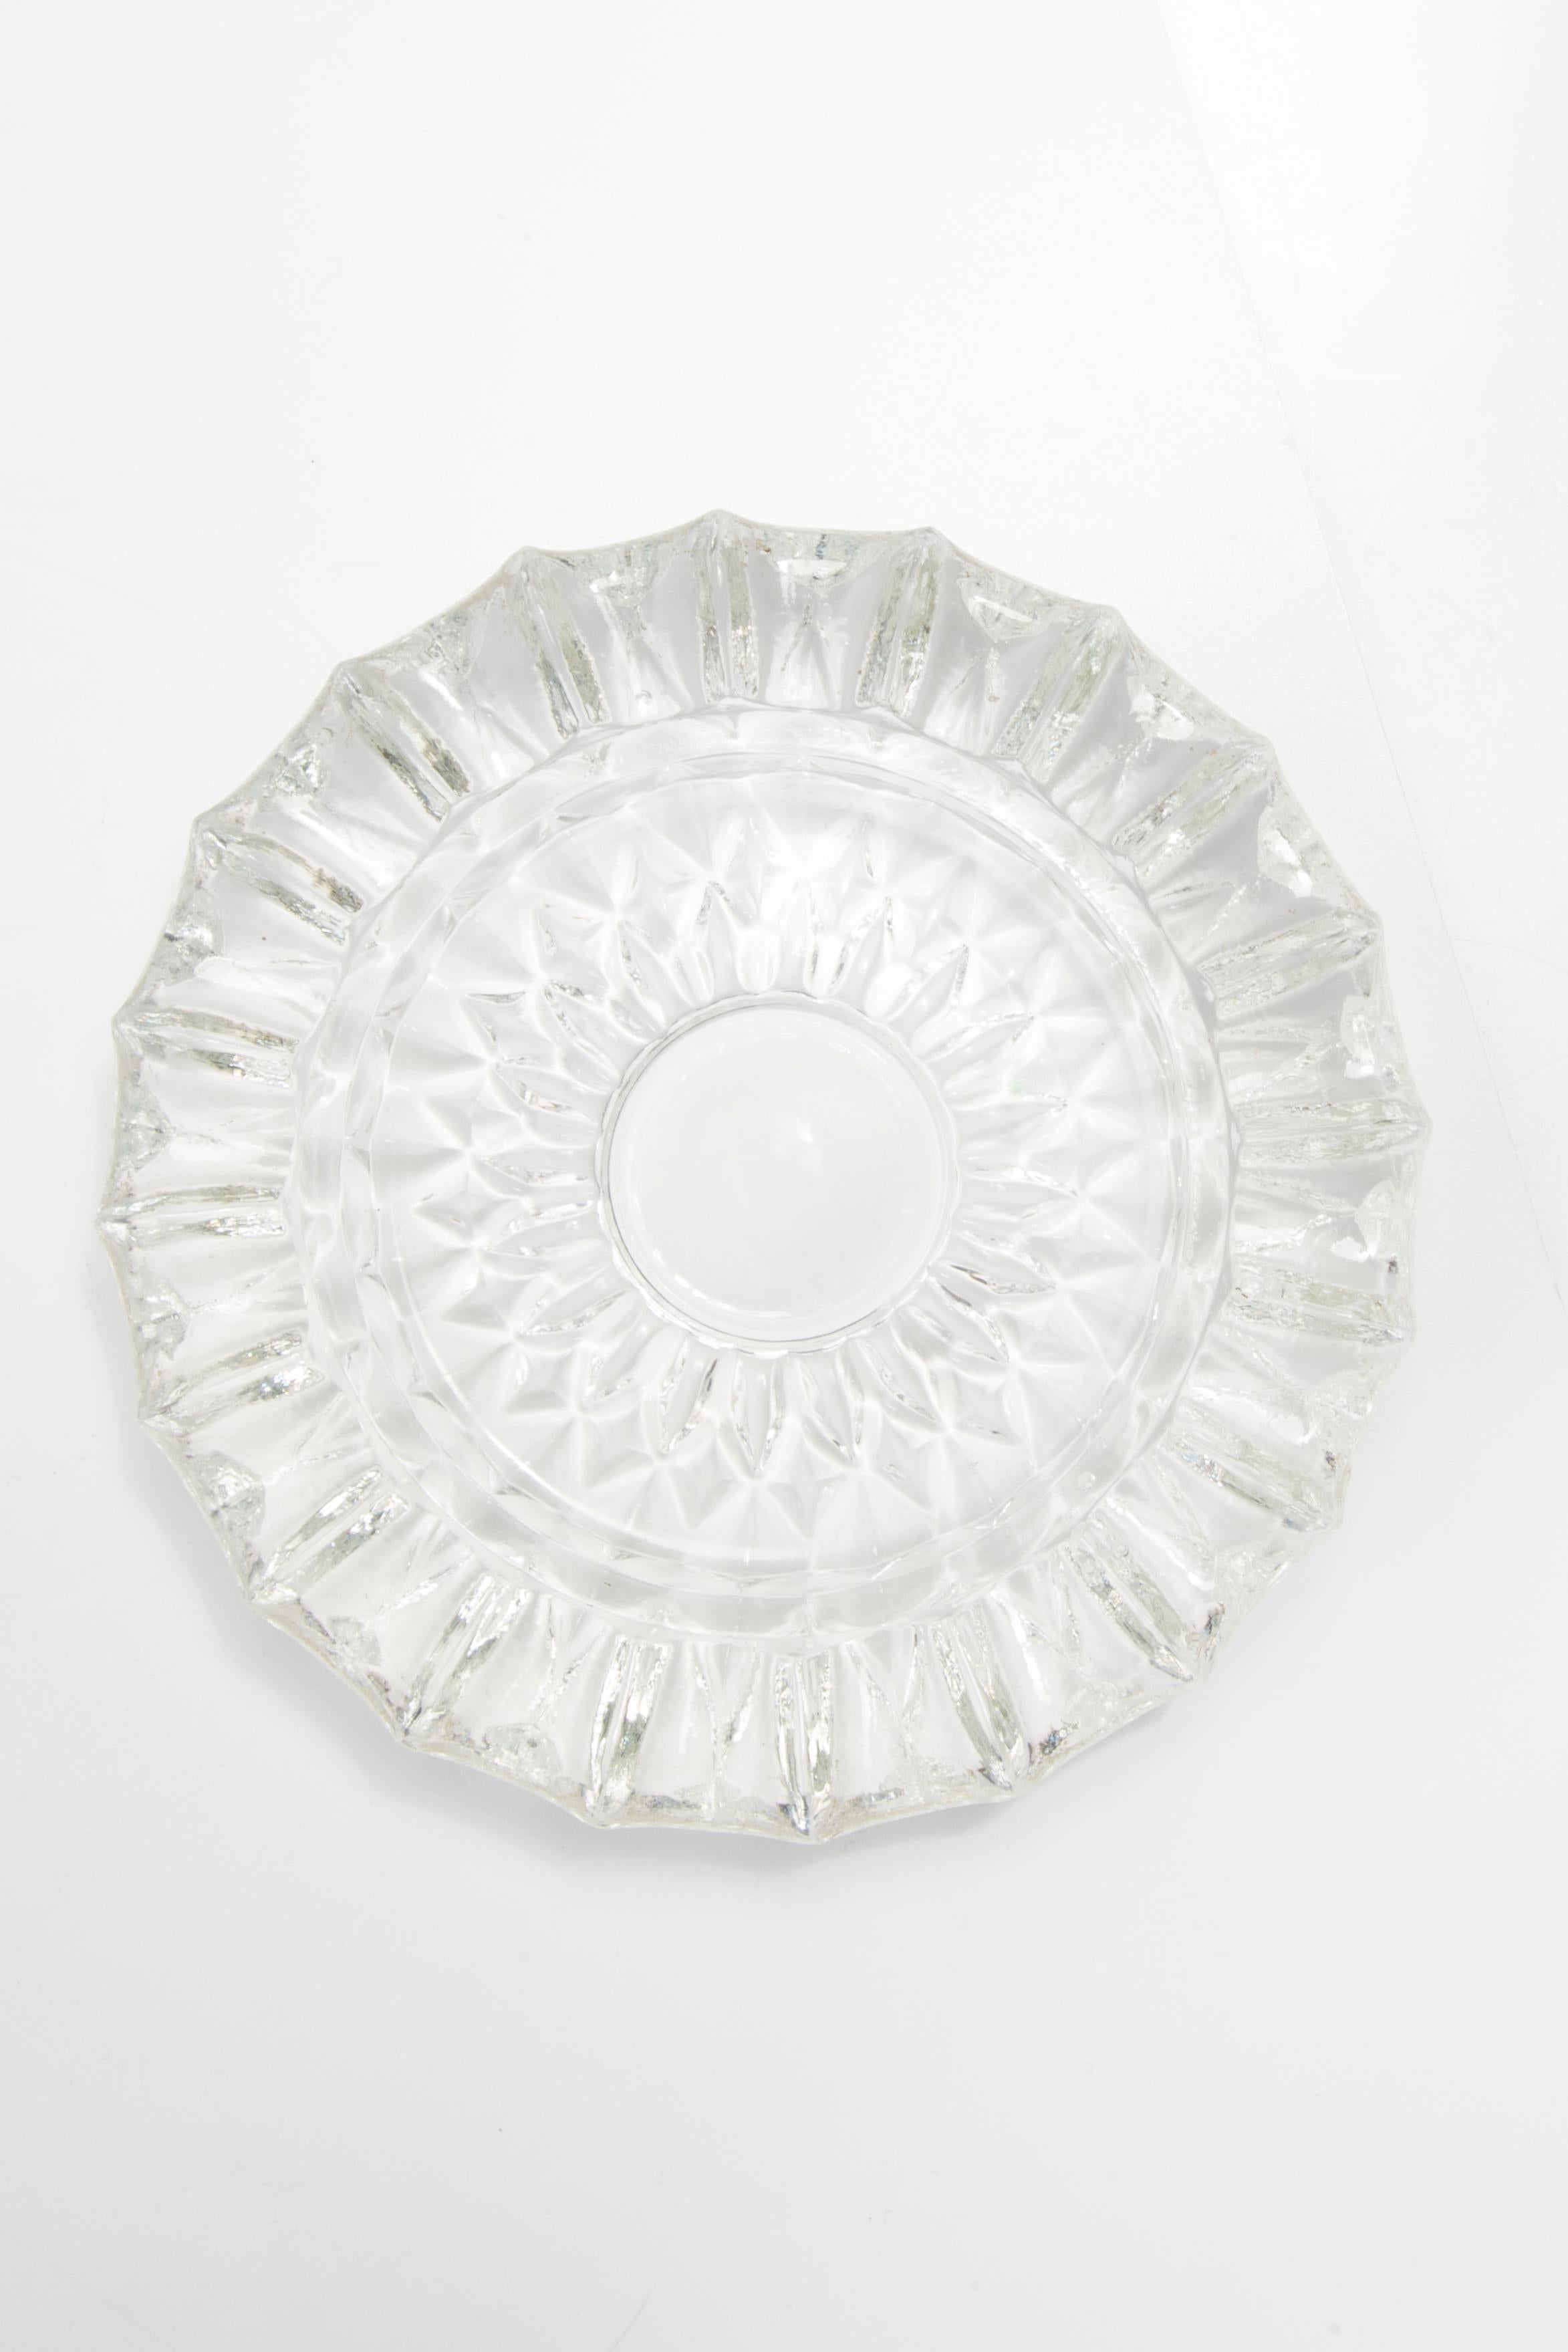 Mid Century Crystal Glass Ashtray Bowl, Italy, 1970s In Good Condition For Sale In 05-080 Hornowek, PL